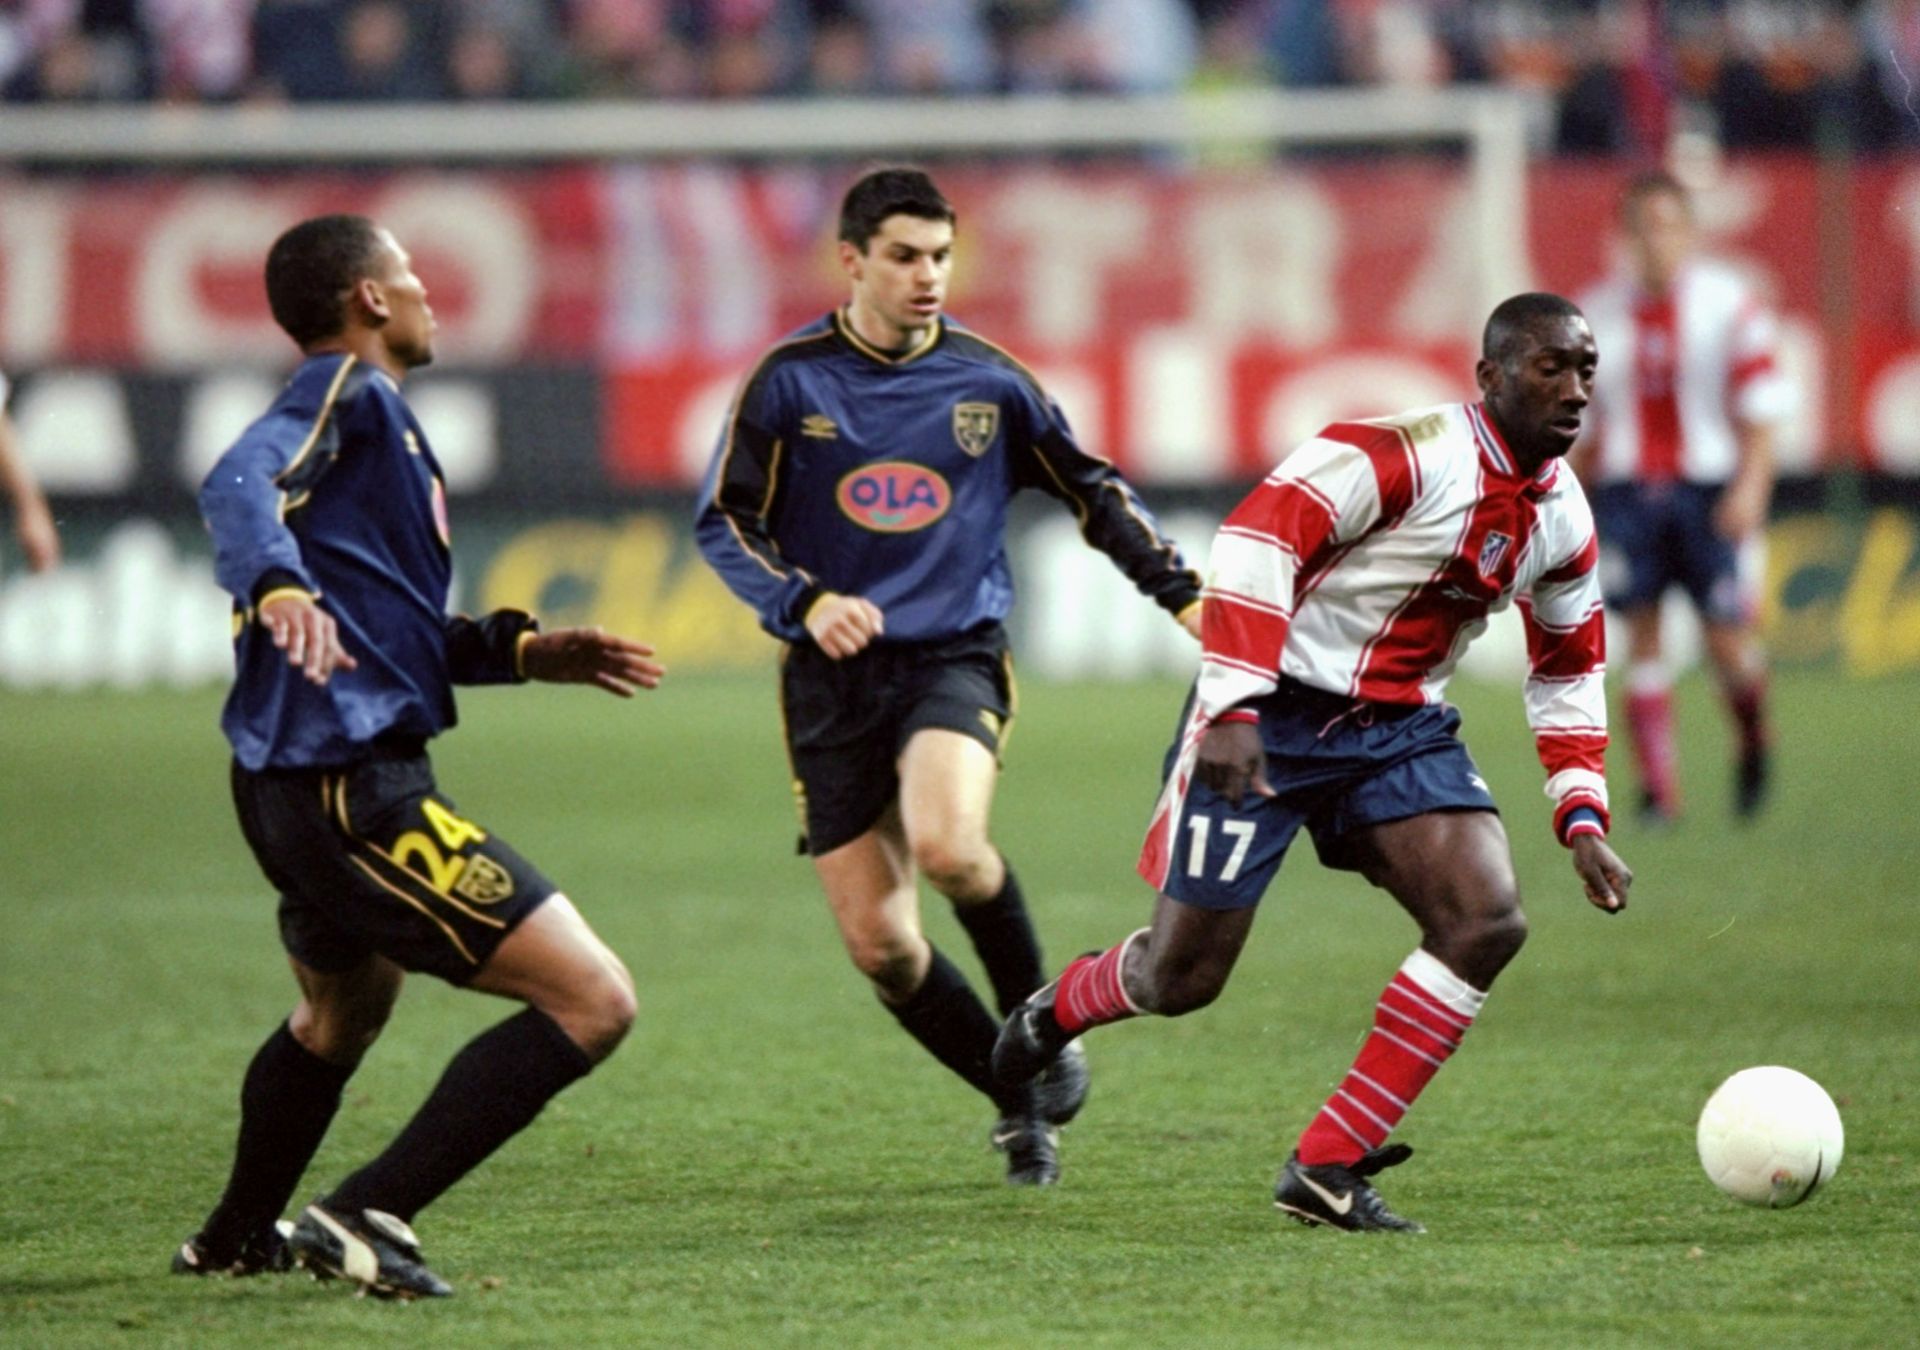 <p>                     Jimmy Floyd Hasselbaink joined Atletico Madrid from Leeds United in a £10 million deal (around €16.7m) in 1999.                   </p>                                      <p>                     Hasselbaink did well in Spain, scoring 33 goals in 44 appearances, but Atletico's season was disastrous as the Rojiblancos were relegated to Segunda. The Dutch striker returned to the Premier League with Chelsea in 2000.                   </p>